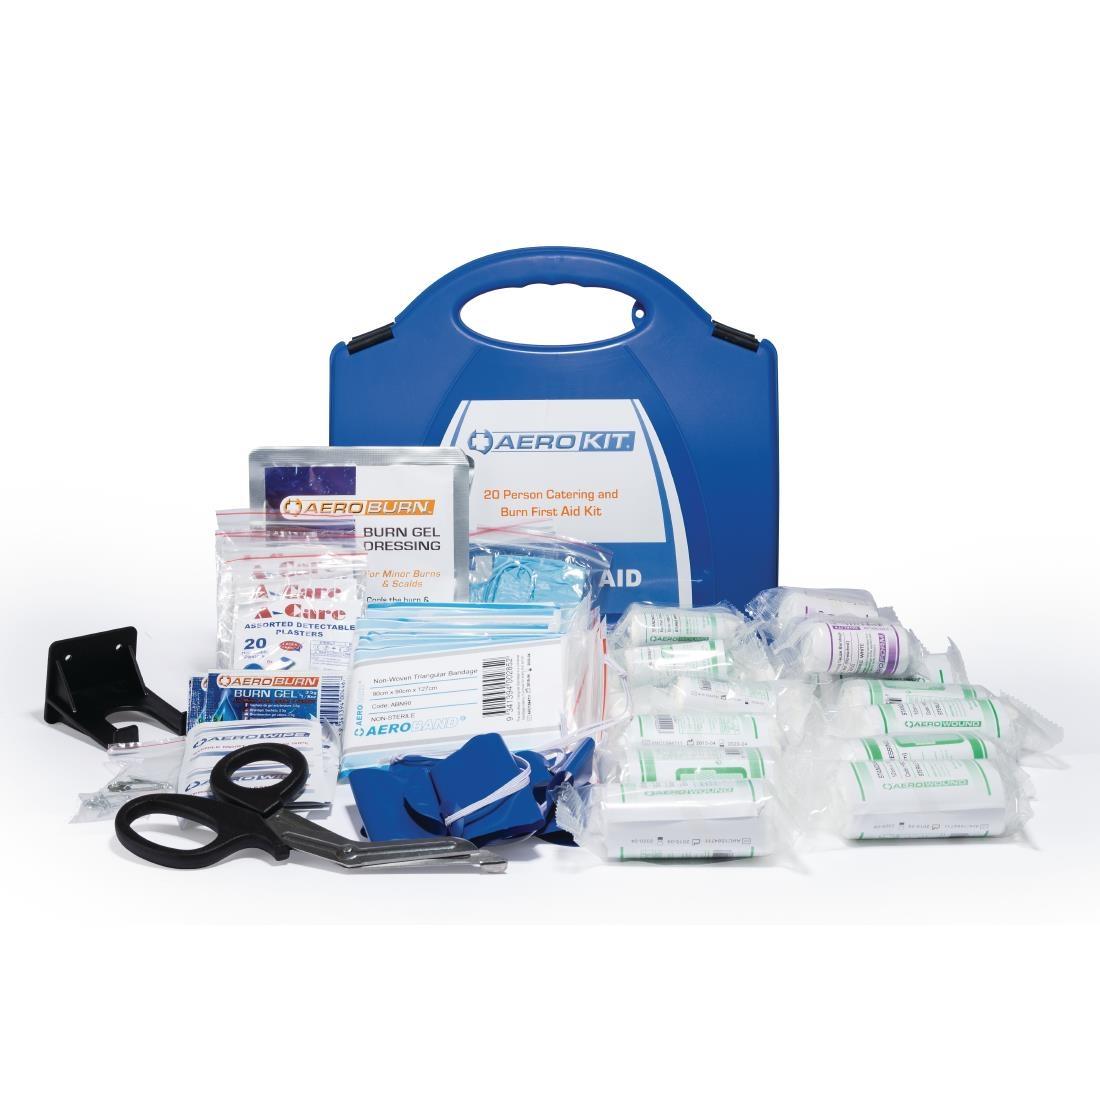 Catering & Burns Kit - 20 Person - CD539  - 3